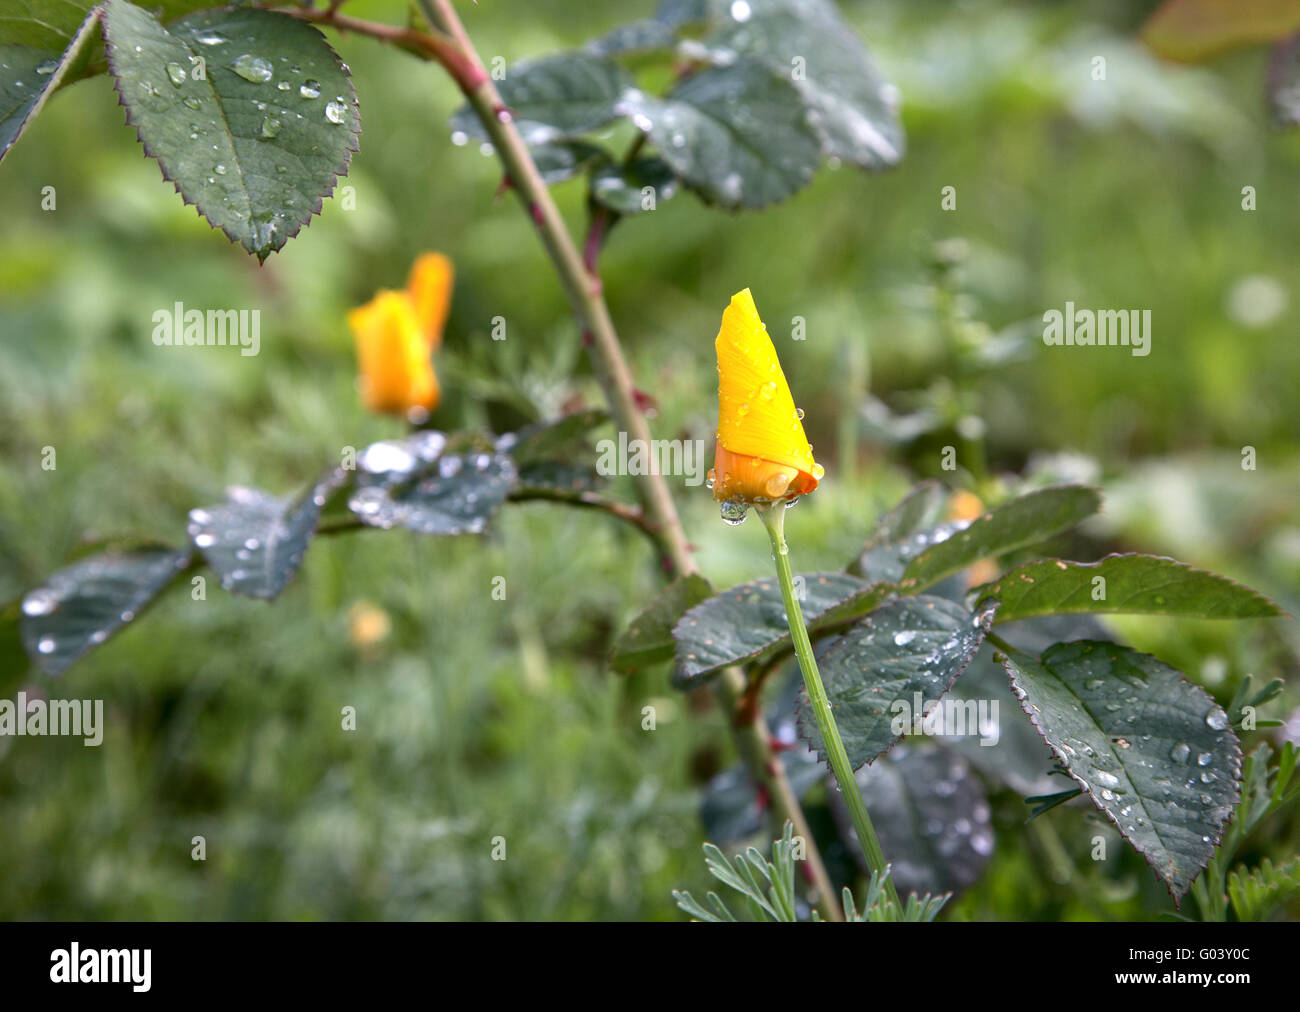 Yellow flower and leaves with drops of water Stock Photo